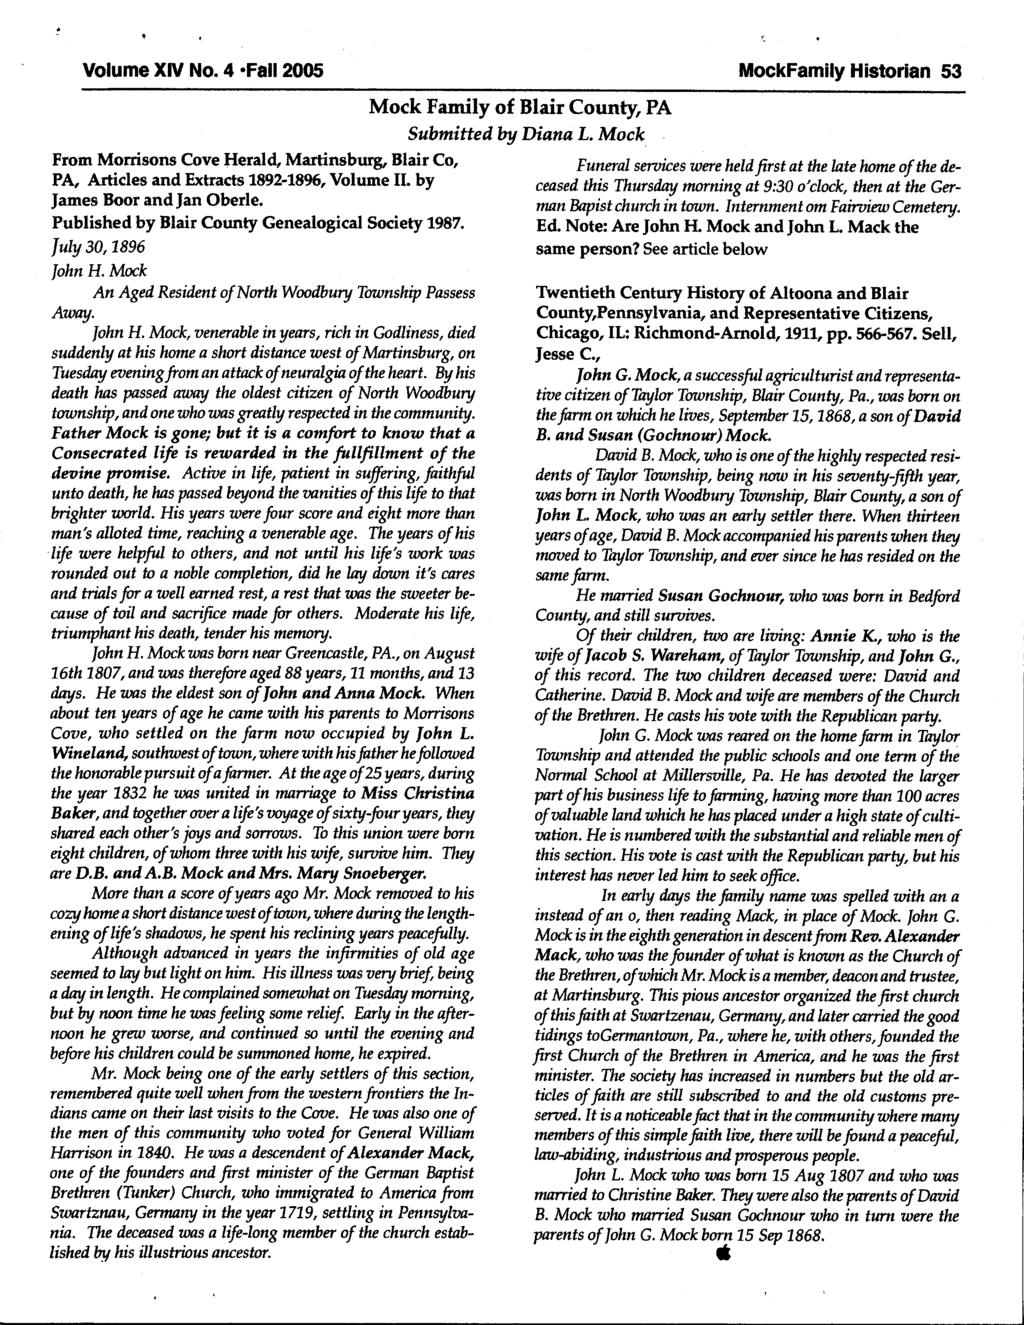 ti Volume XIV No.4.Fll2005 MockFmily Hislorln 53 From Morrisons Cove Herl4 Mrtinsbur& Blir Co, PA, Articles nd Extrcts7892-1896,Volume II. by Jmes Boor ndln Oberle.